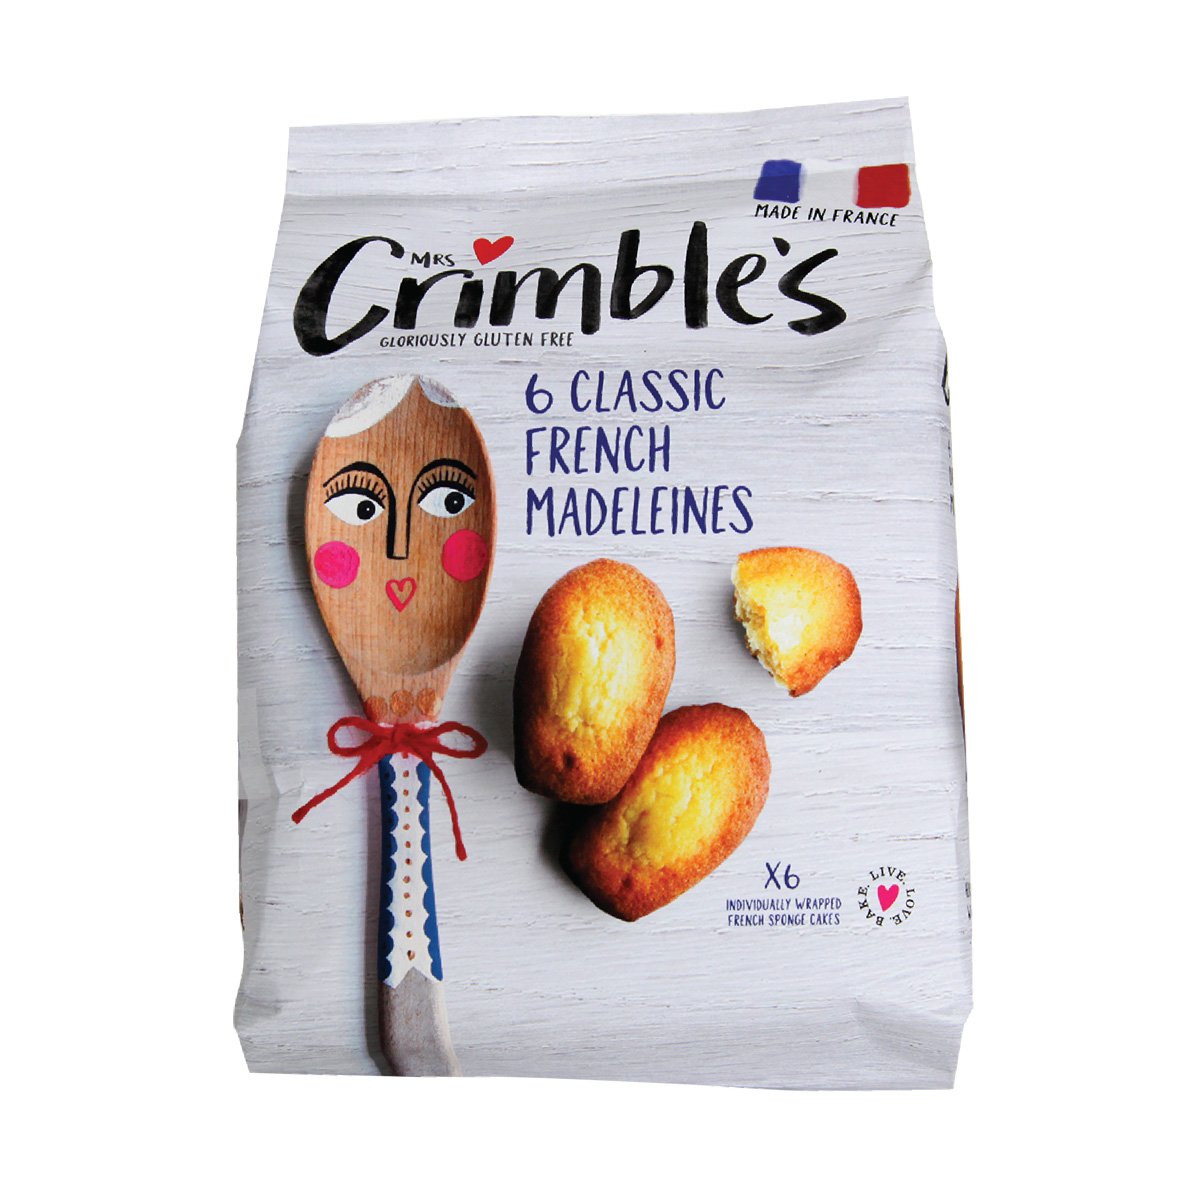 Mrs Crimbles 6 CLASSIC FRENCH MADELEINES - Just Natural